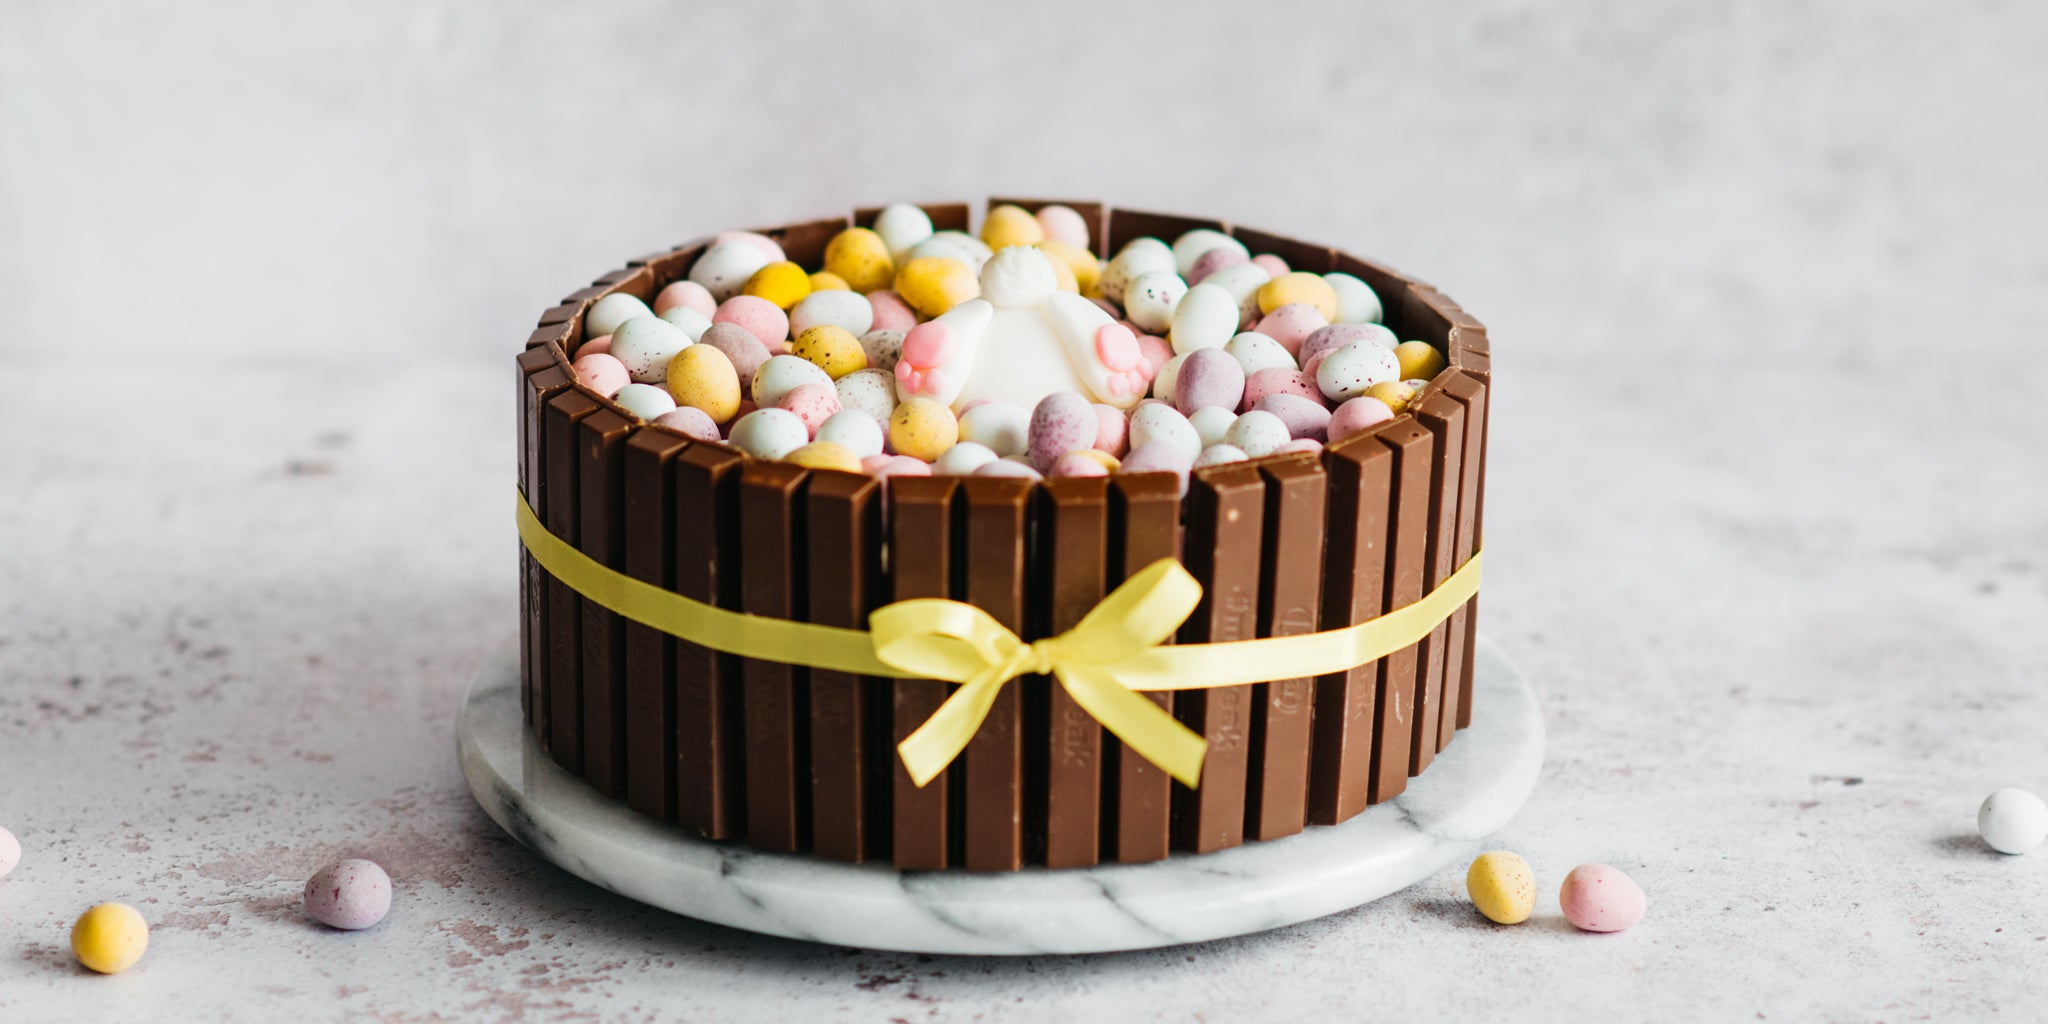 Cake decorated in kit kats and yellow ribbon with mini eggs in the foreground